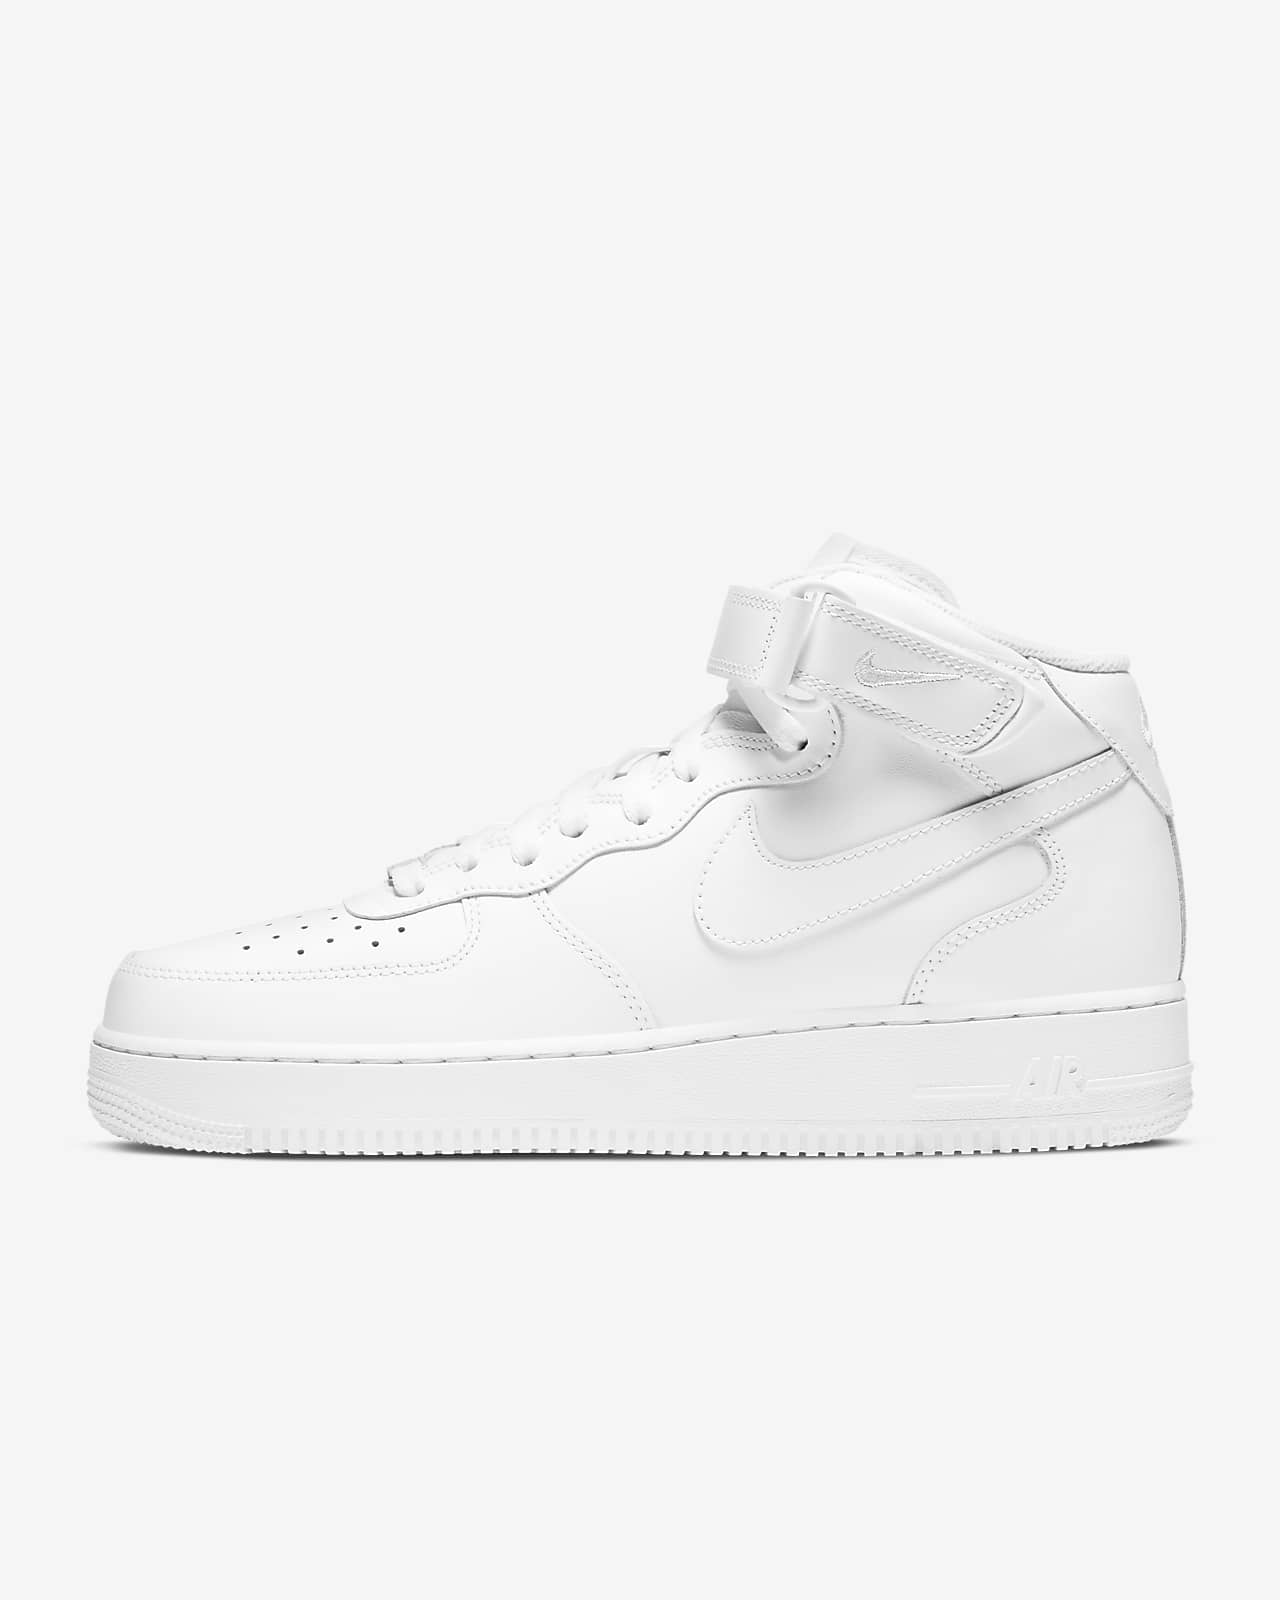 Chaussure Nike Air Force 1 Mid '07 pour Homme